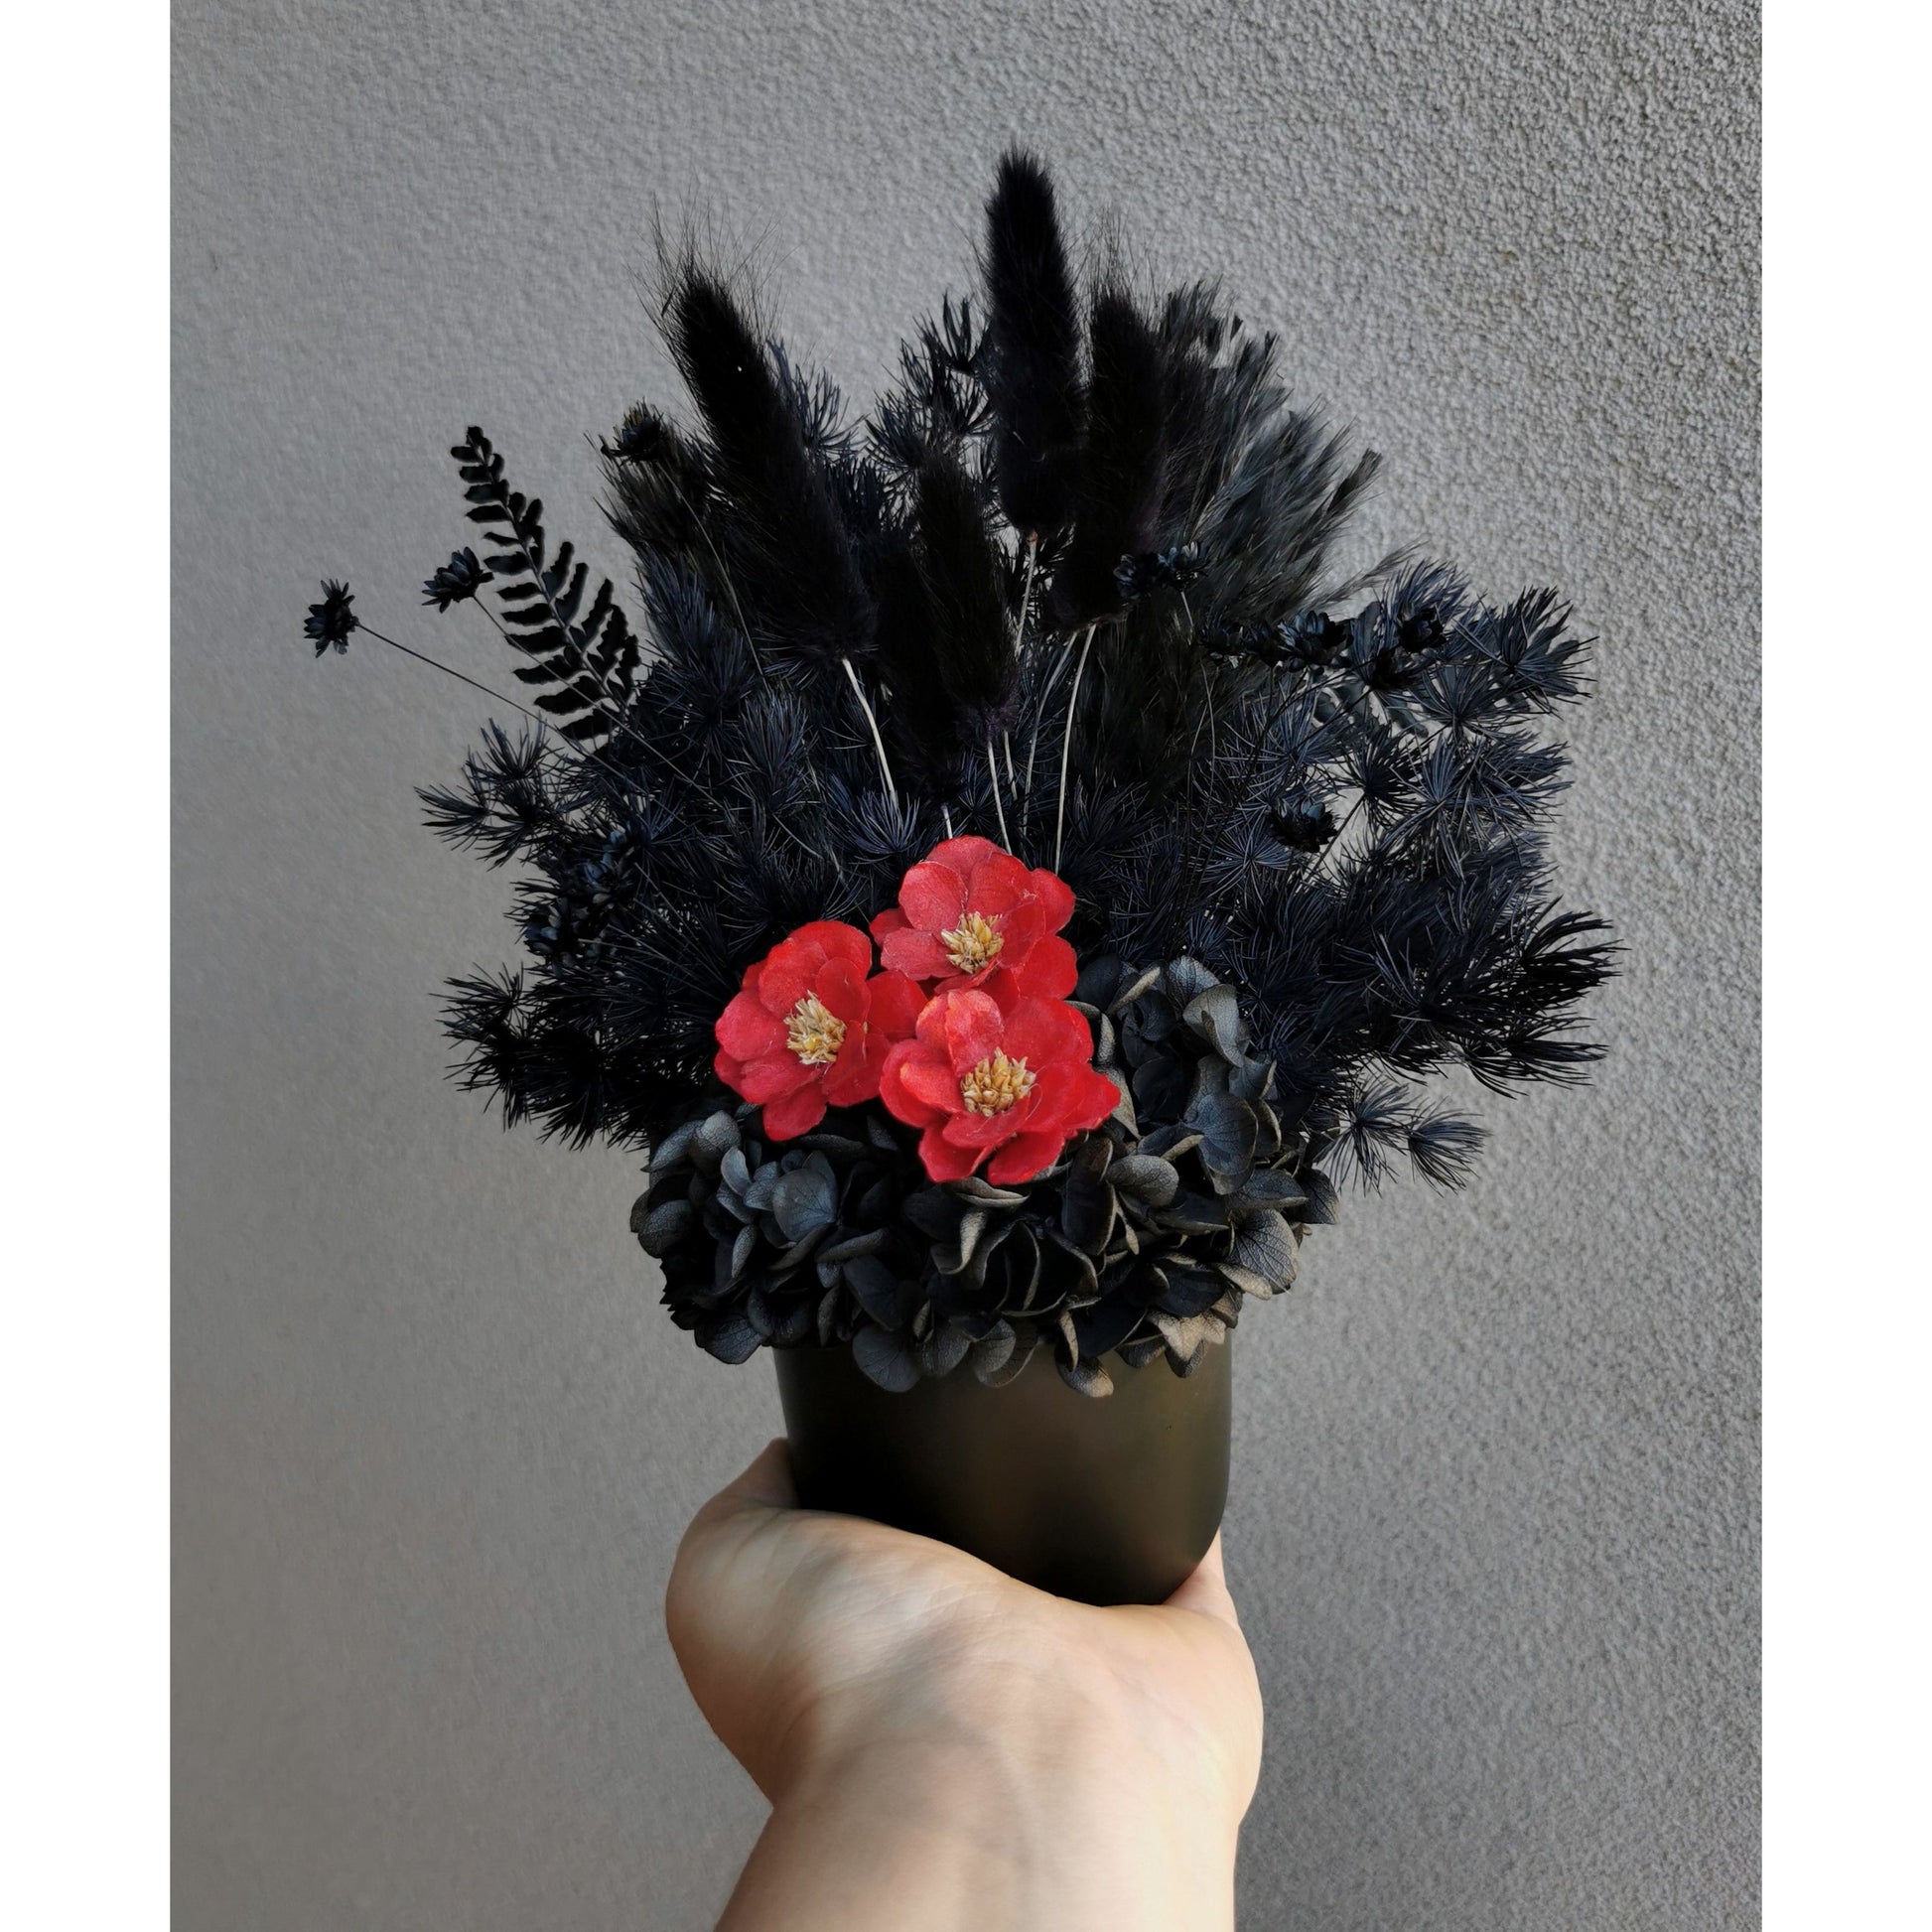 All blacked dried & preserved flowers set in to a mini black pot & featuring 3 mini red flowers in the centre. Photo shows flower arrangement being held by hand against a blank wall